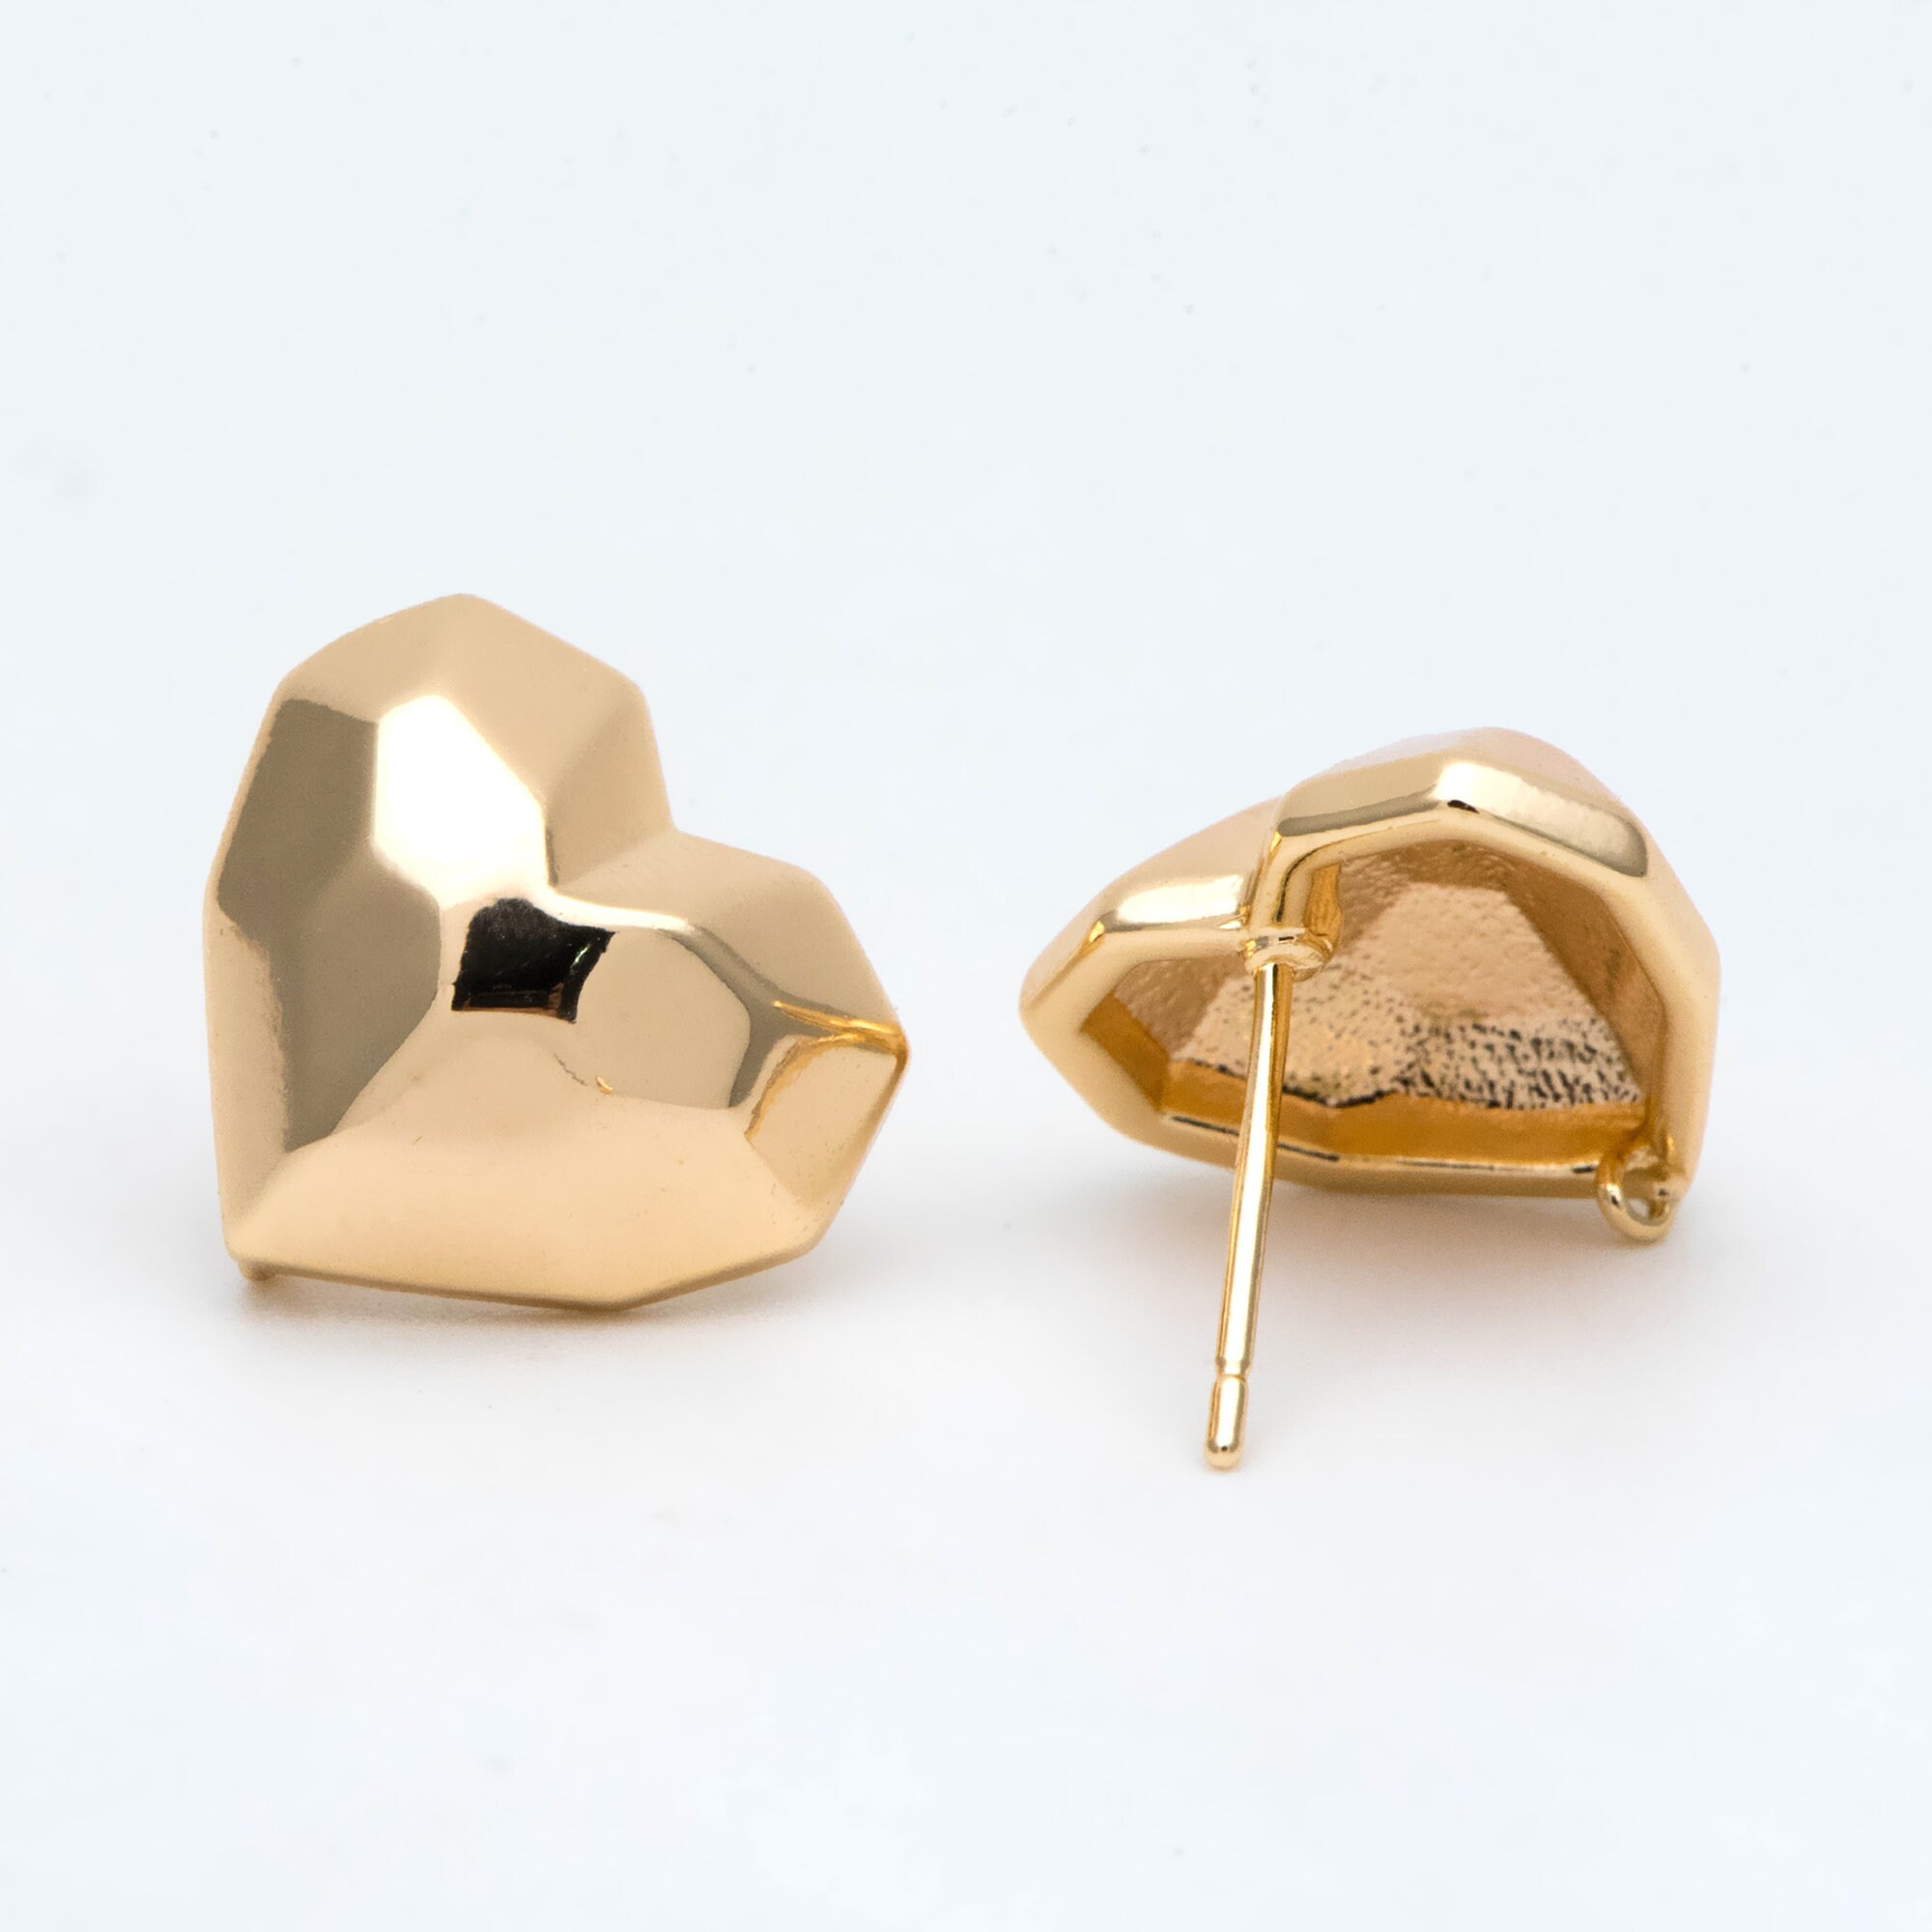 10pcs Faceted Geometric Earrings, Real Gold Plated Brass Geometric